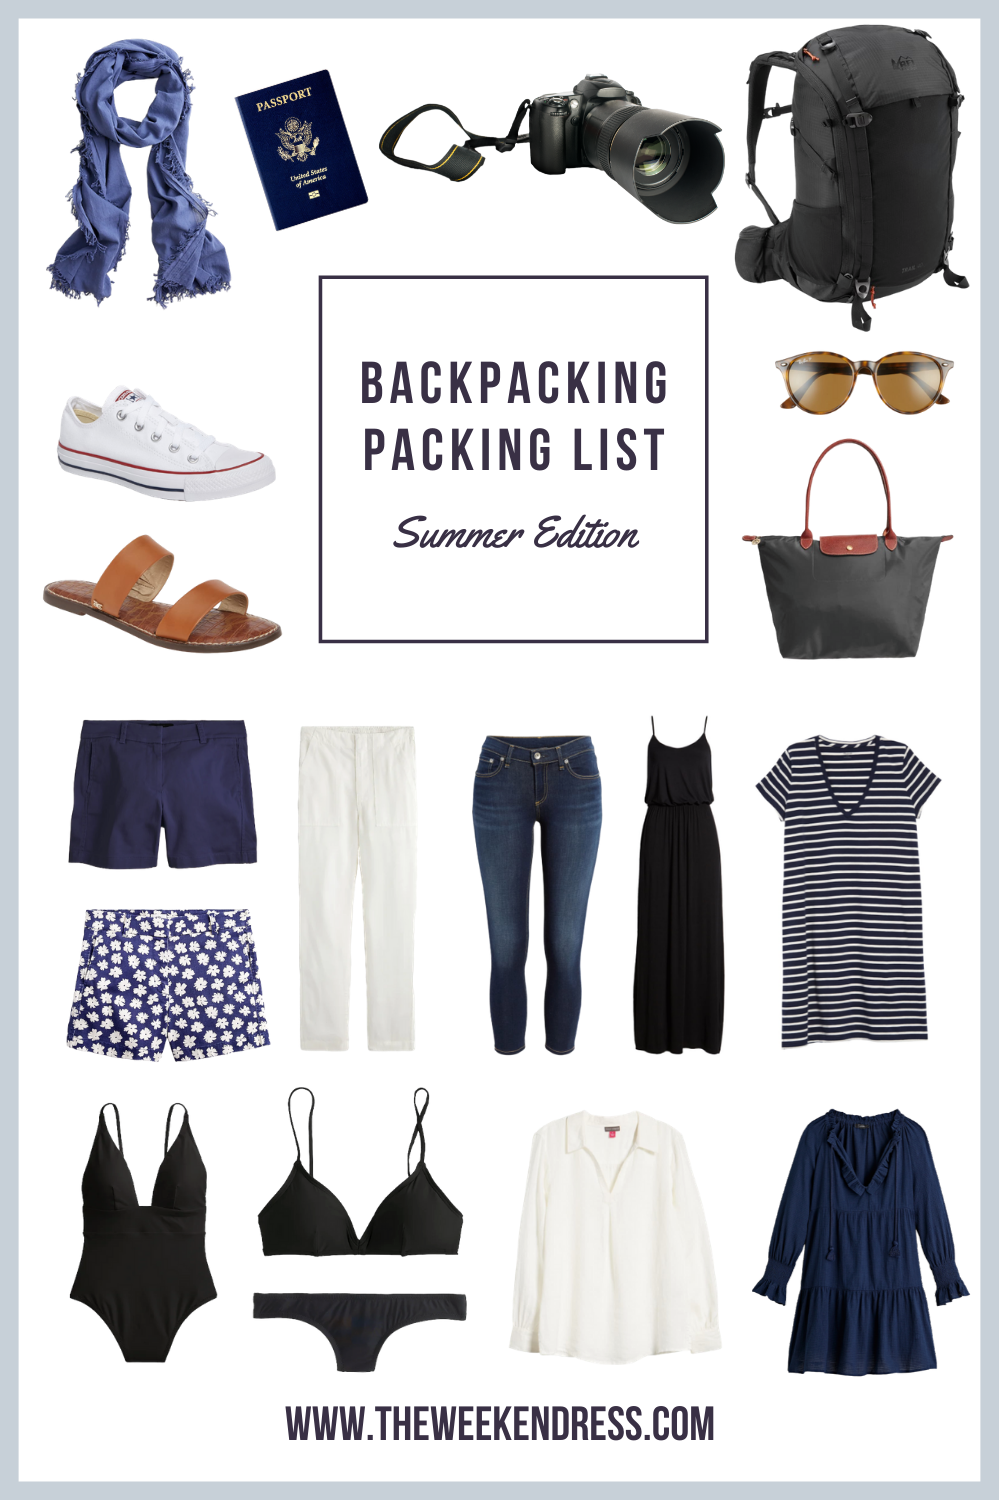 Backpacking Packing List for Summer Backpacking Trip Across Europe ...